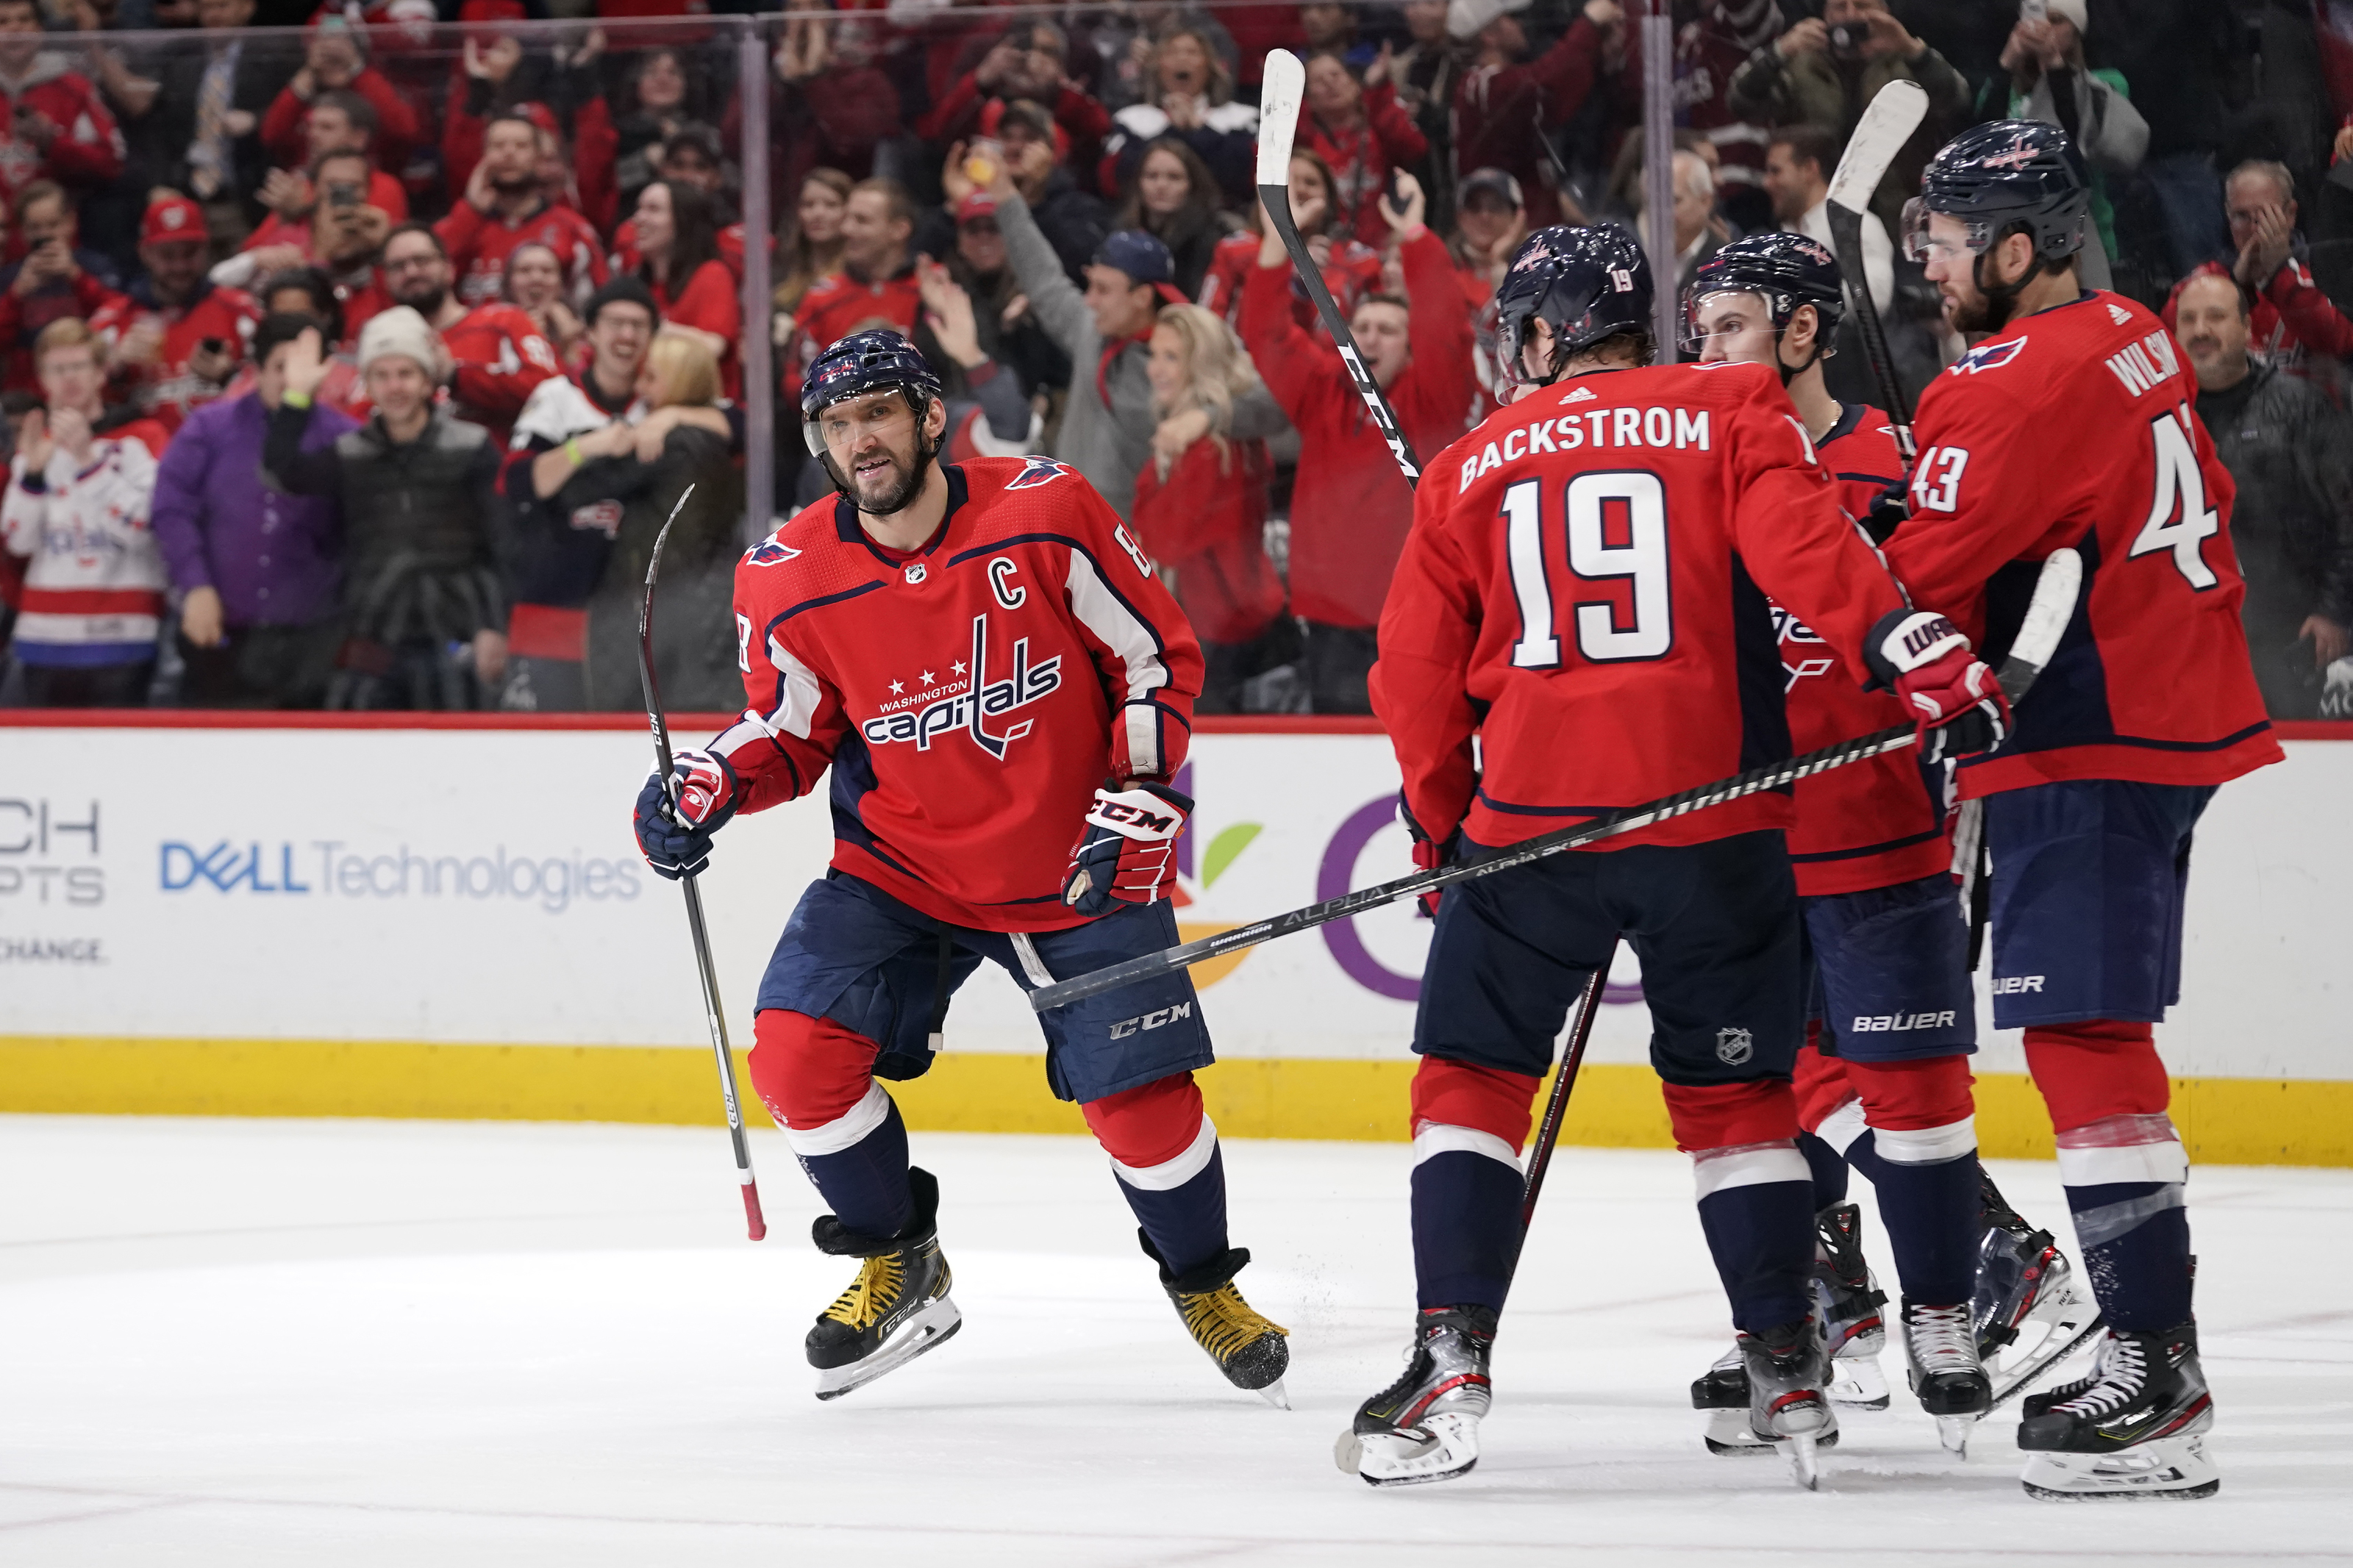 Oshie confirms Ovechkin does share Cup with Capitals' mates